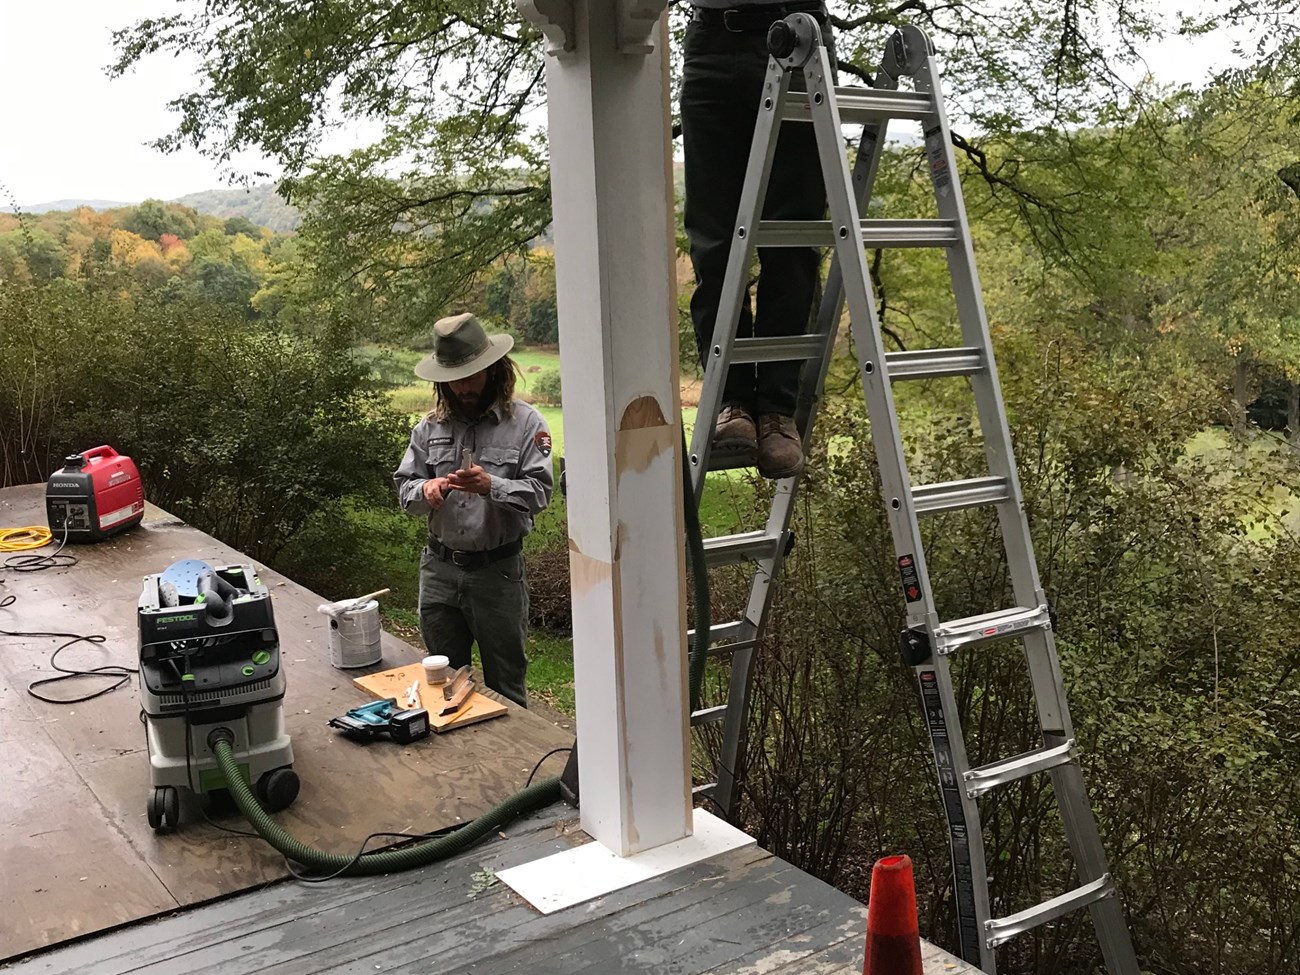 Two Park Rangers repairing a wooden porch.